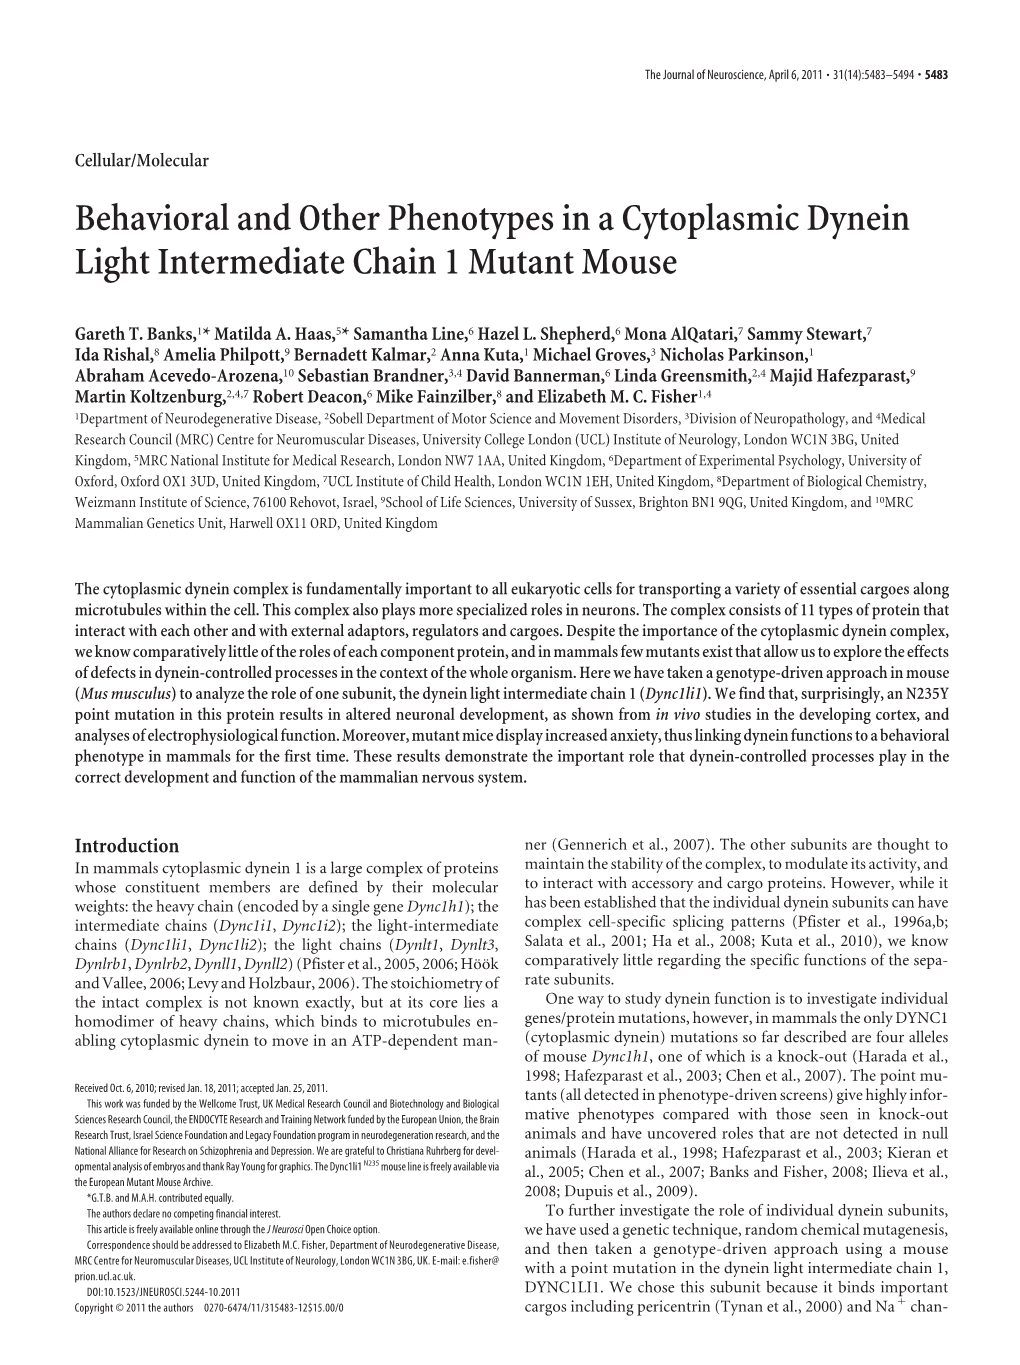 Behavioral and Other Phenotypes in a Cytoplasmic Dynein Light Intermediate Chain 1 Mutant Mouse